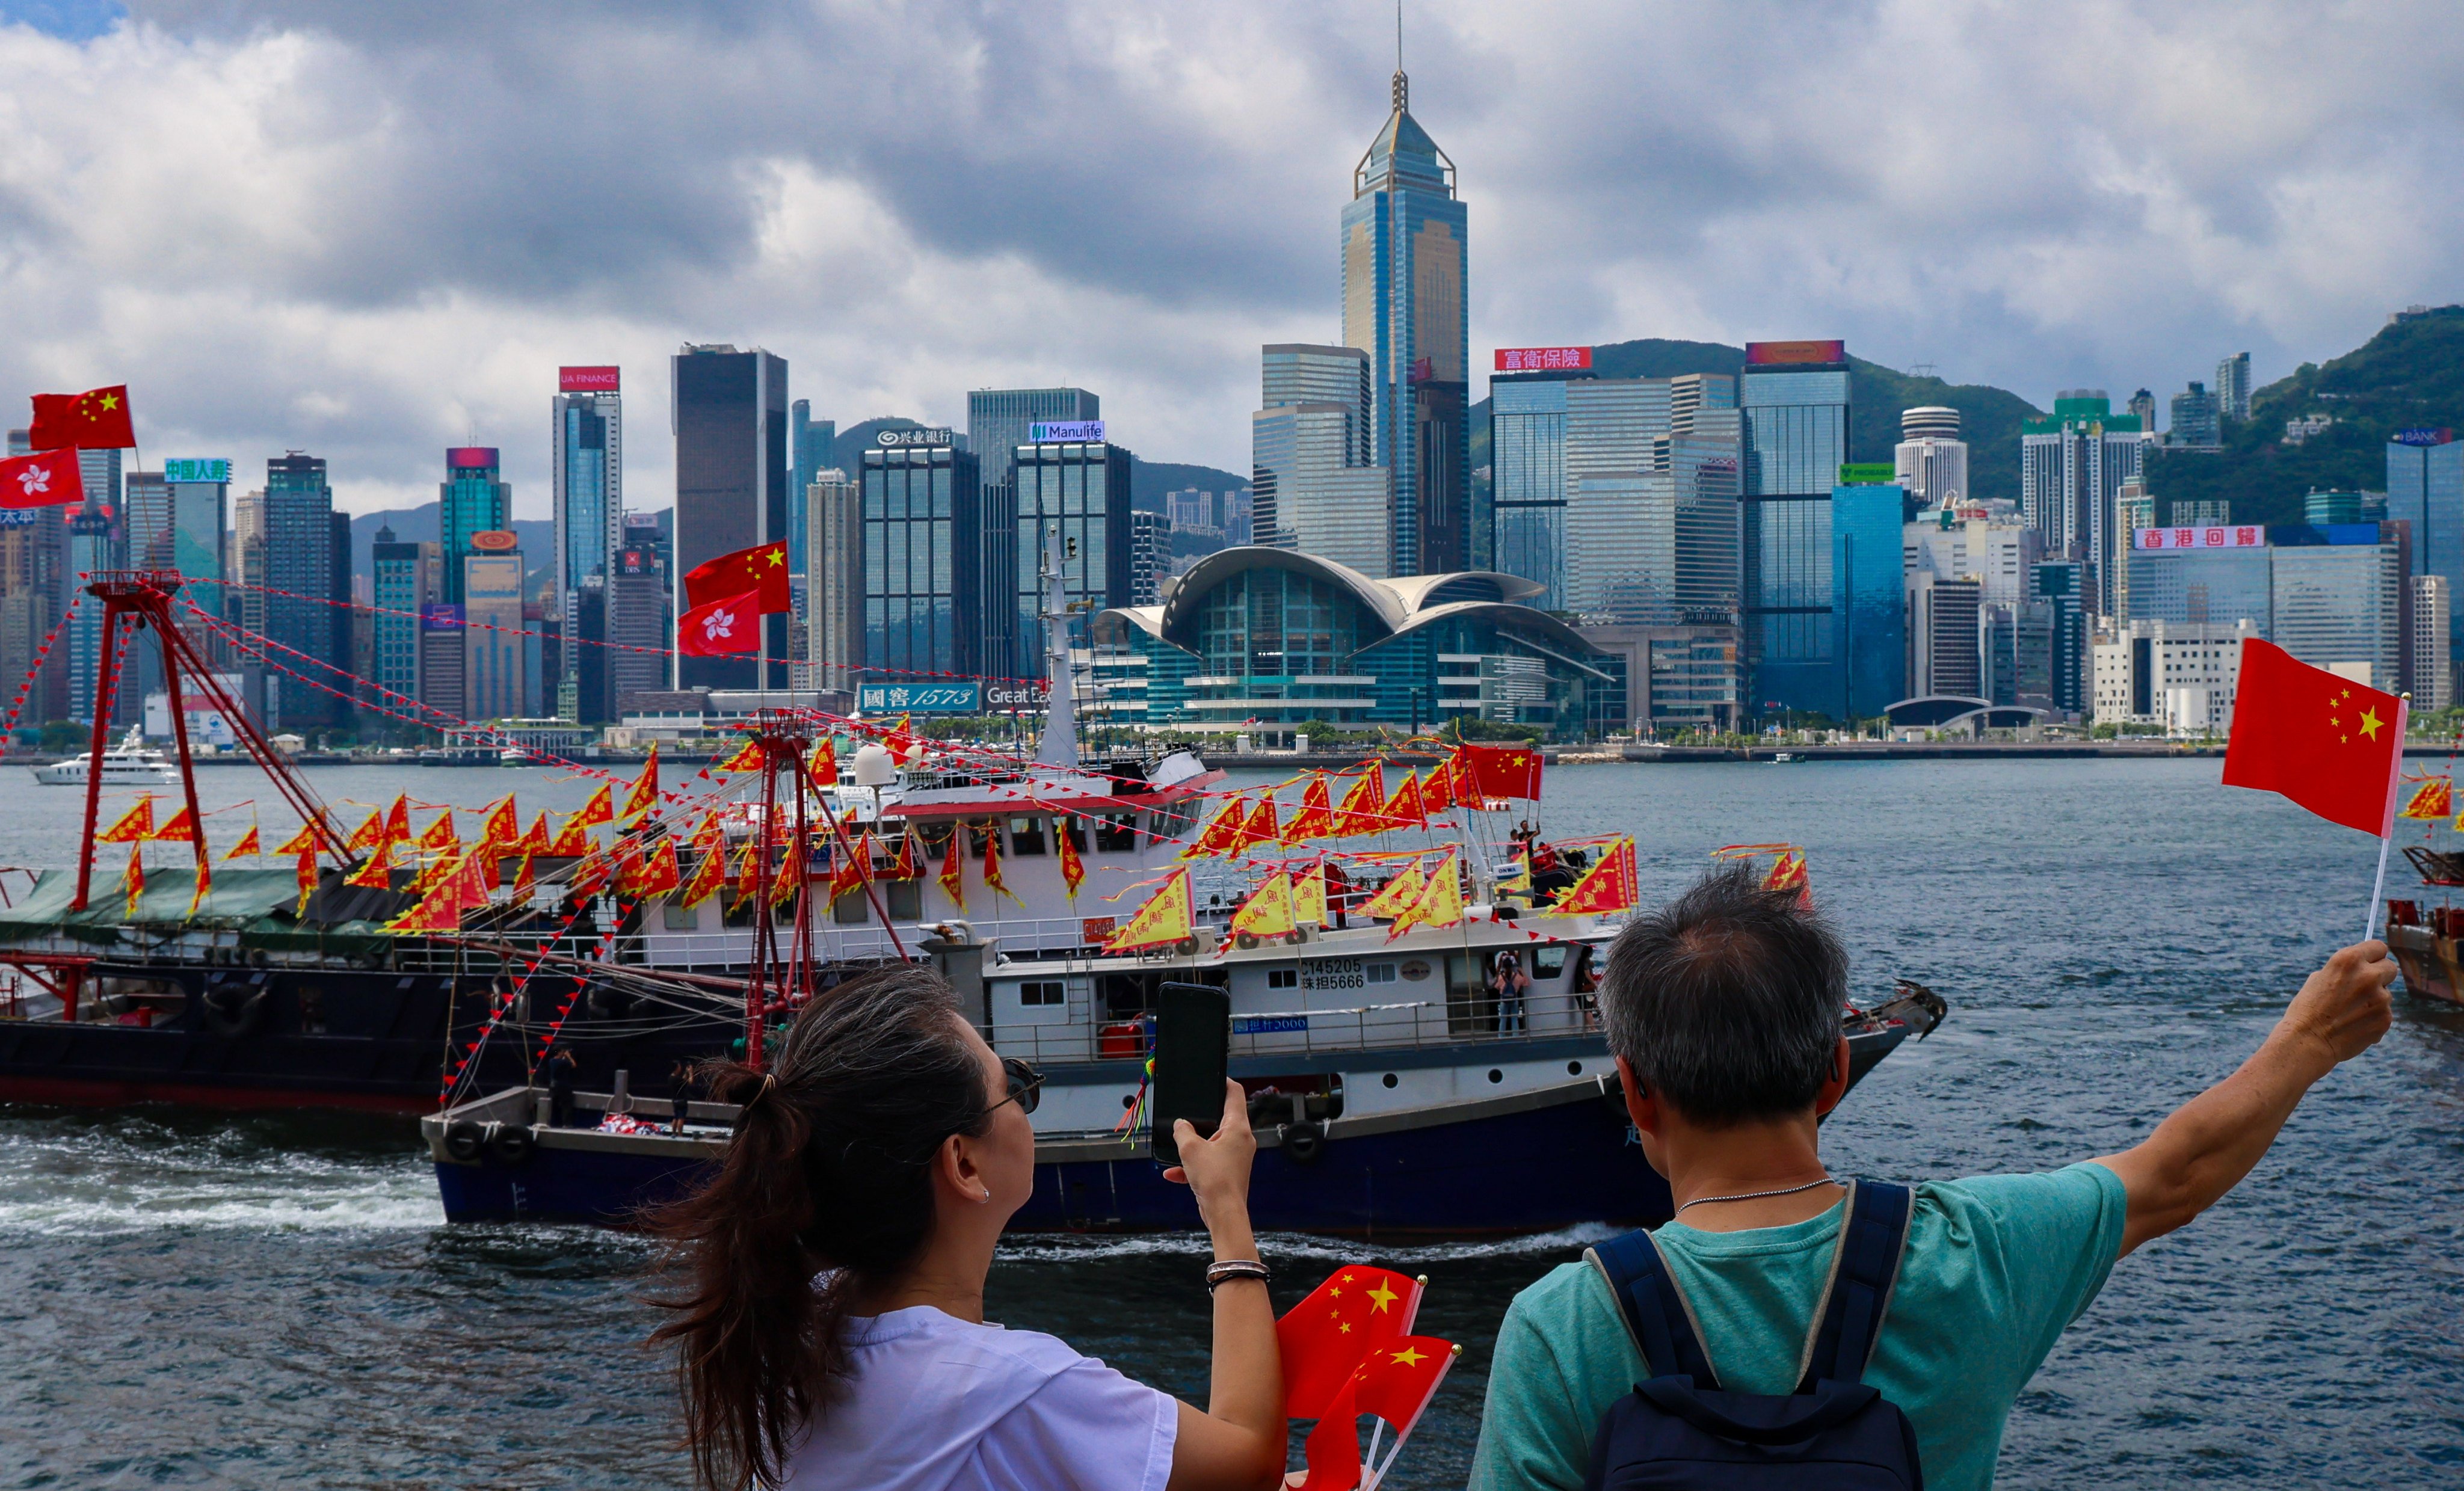 Hong Kong marked the 27th handover anniversary with a raft of events, including a fishing boat parade. Photo: Jelly Tse